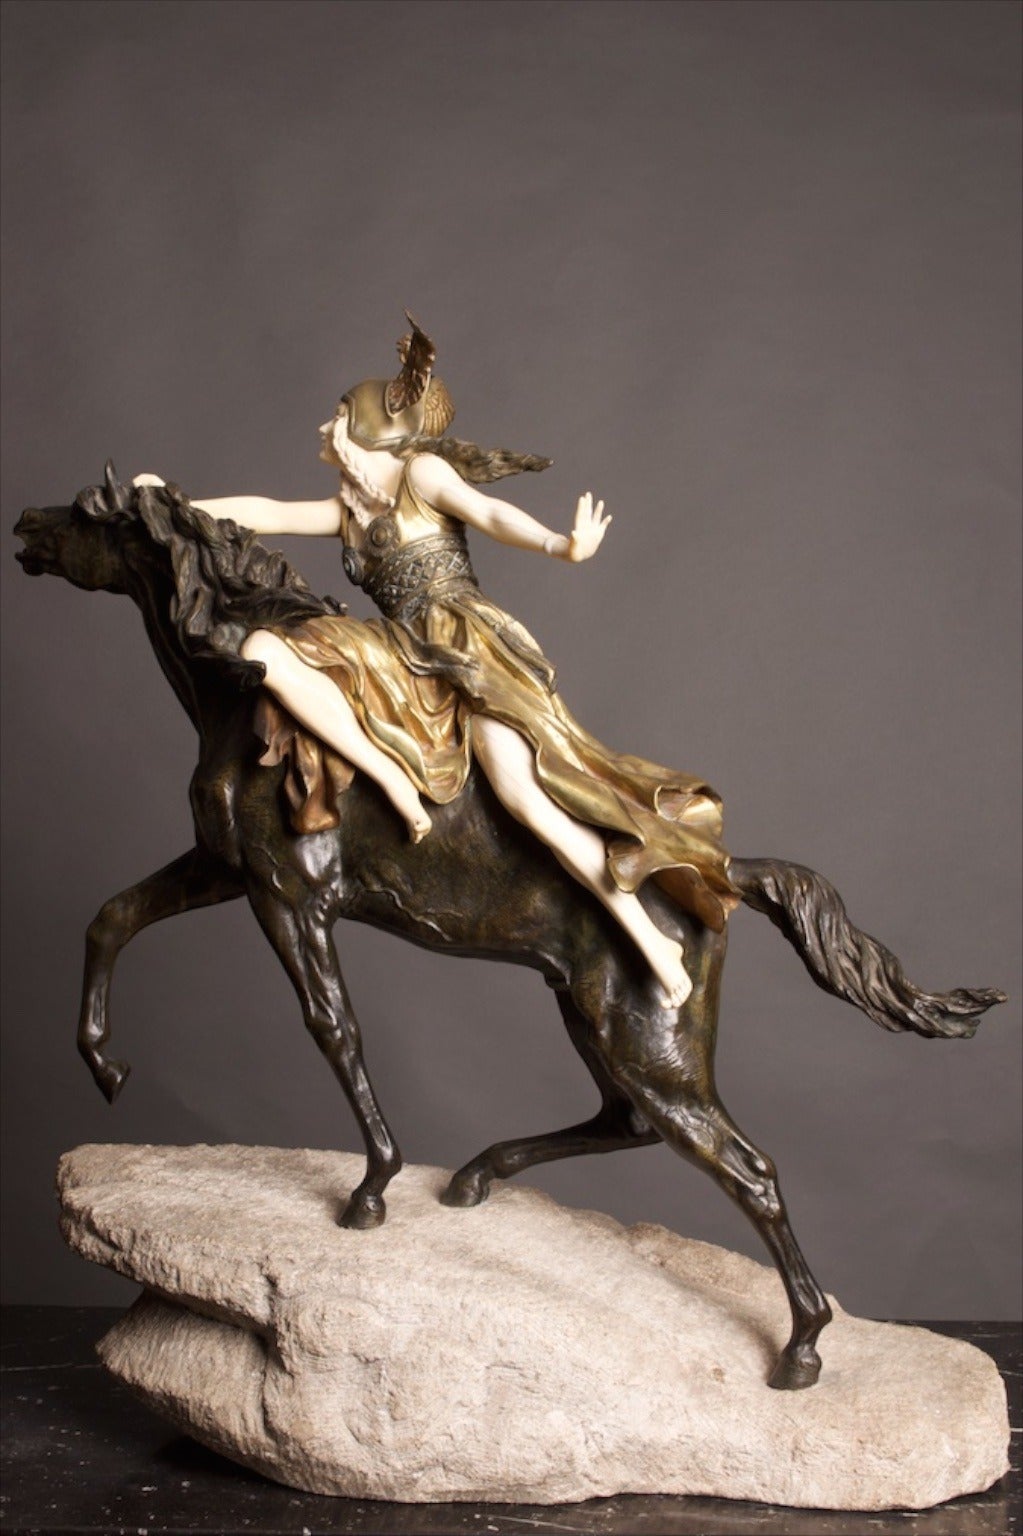 This sculpture is known as ‘Valkyrie’ & also as ‘Towards the Unknown’. Consisting of Bronze, Ormolu & Bone upon a textured stone base. The signature Claire JR Colinet to the base.
Colinet was born in Belgium & studied in France, exhibiting at the